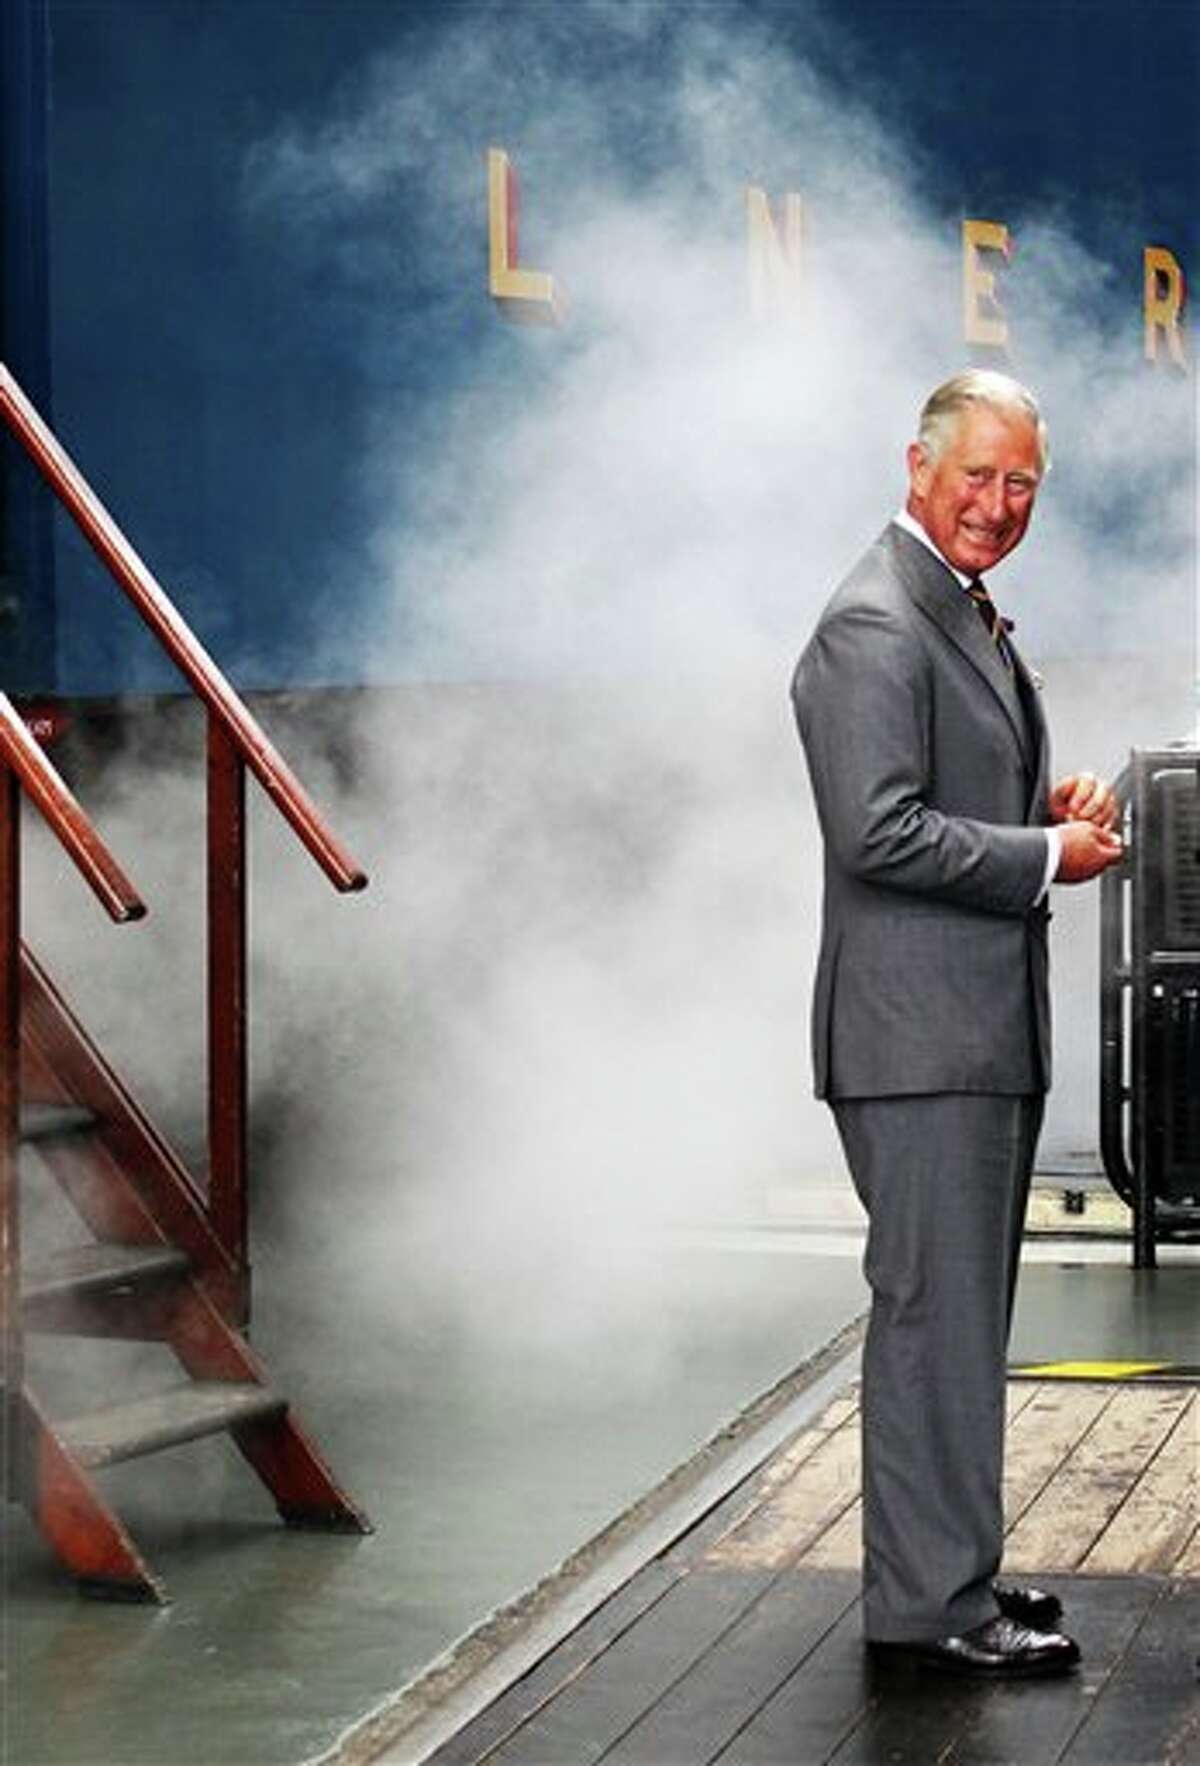 Britain's Prince Charles arrives on the Bittern steam locomotive as he visits the National Railway Museum in York, Britain, Monday, July 22, 2013. Prince William's wife, Kate, is in the early stages of labor in a private wing of a central London hospital, palace officials said Monday. It is a historic moment for the British monarchy — the couple's first child will become third in line for the British throne, after Prince Charles and William, and should eventually become king or queen. (AP Photo/PA, Lynne Cameron) UNITED KINGDOM OUT, NO SALES, NO ARCHIVE